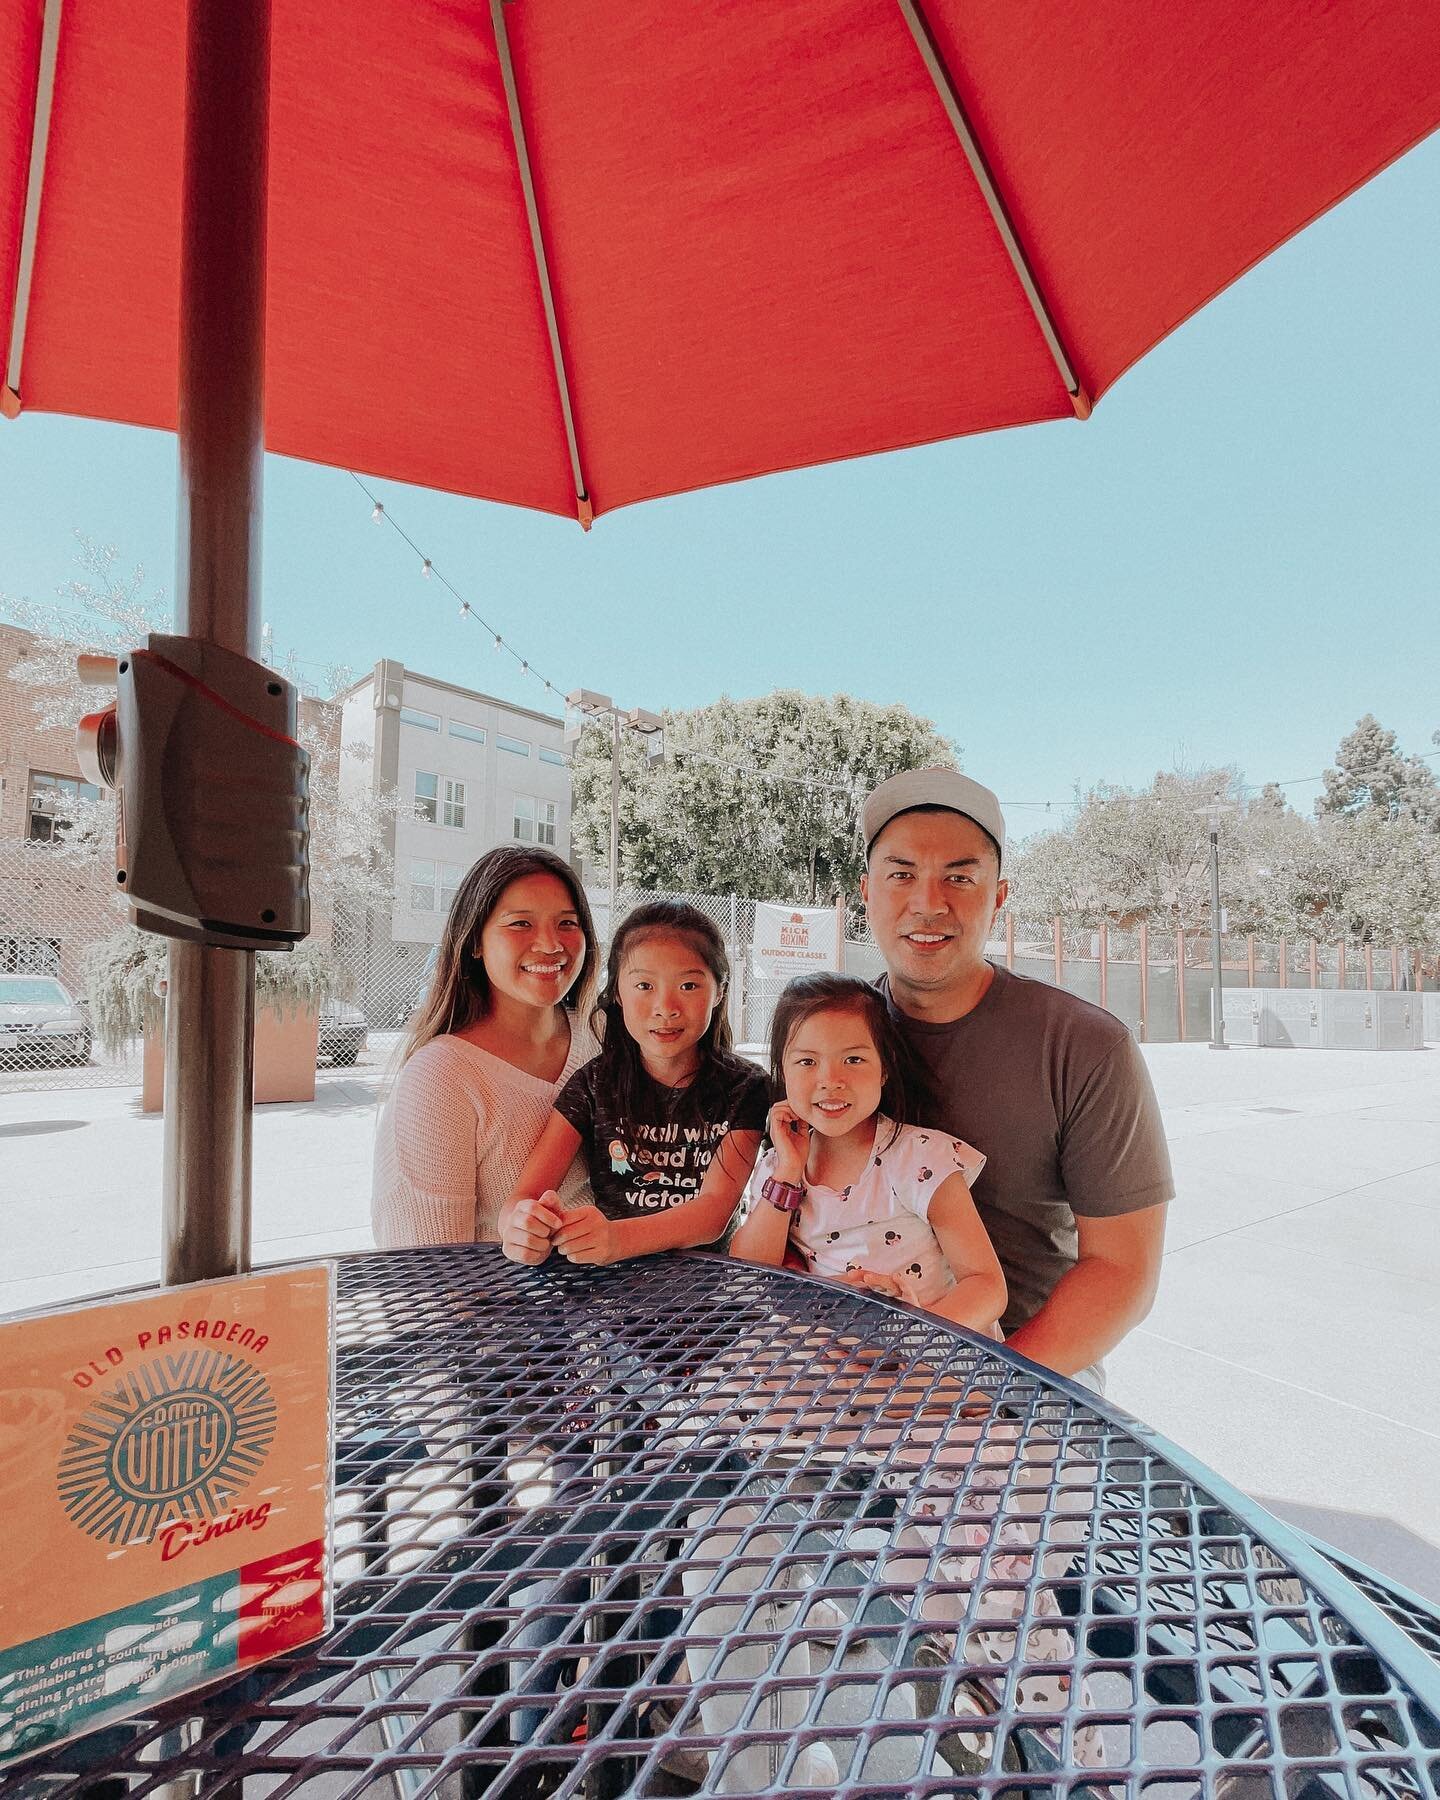 Thank you @OldPasadena for having us! There are so many amazing local businesses in Old Town Pasadena and I&rsquo;m happy to highlight a few AAPI-owned shops to celebrate Mother&rsquo;s Day and AAPI heritage month. @OldPasadena is open and need all o